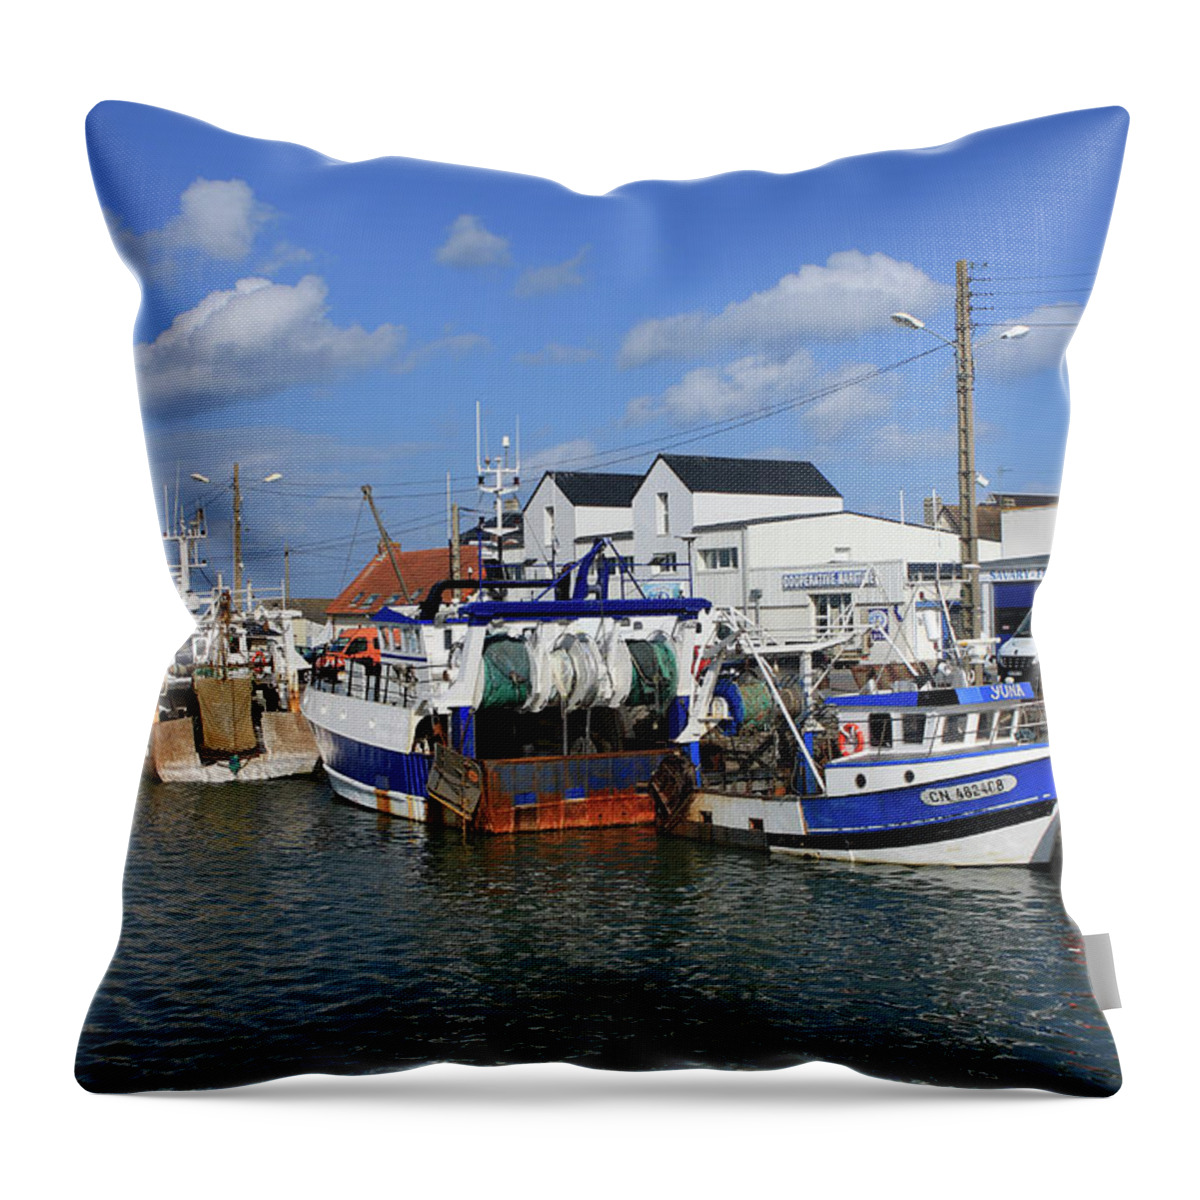 Ships Throw Pillow featuring the photograph Fishing Boat Harbour by Aidan Moran